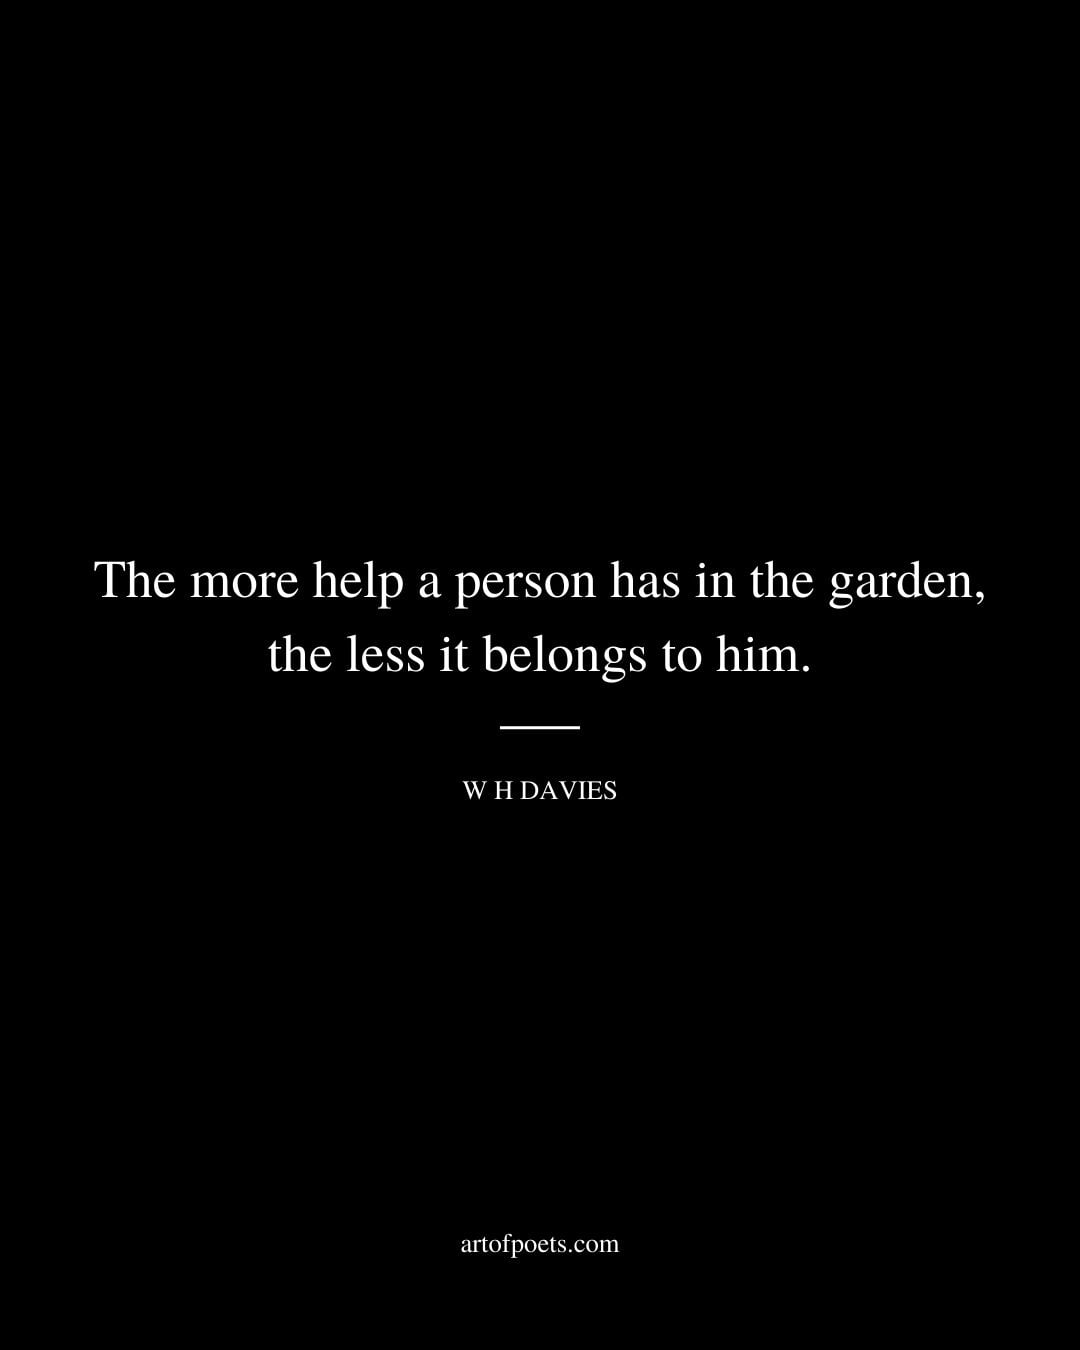 The more help a person has in the garden the less it belongs to him. – W H Davies